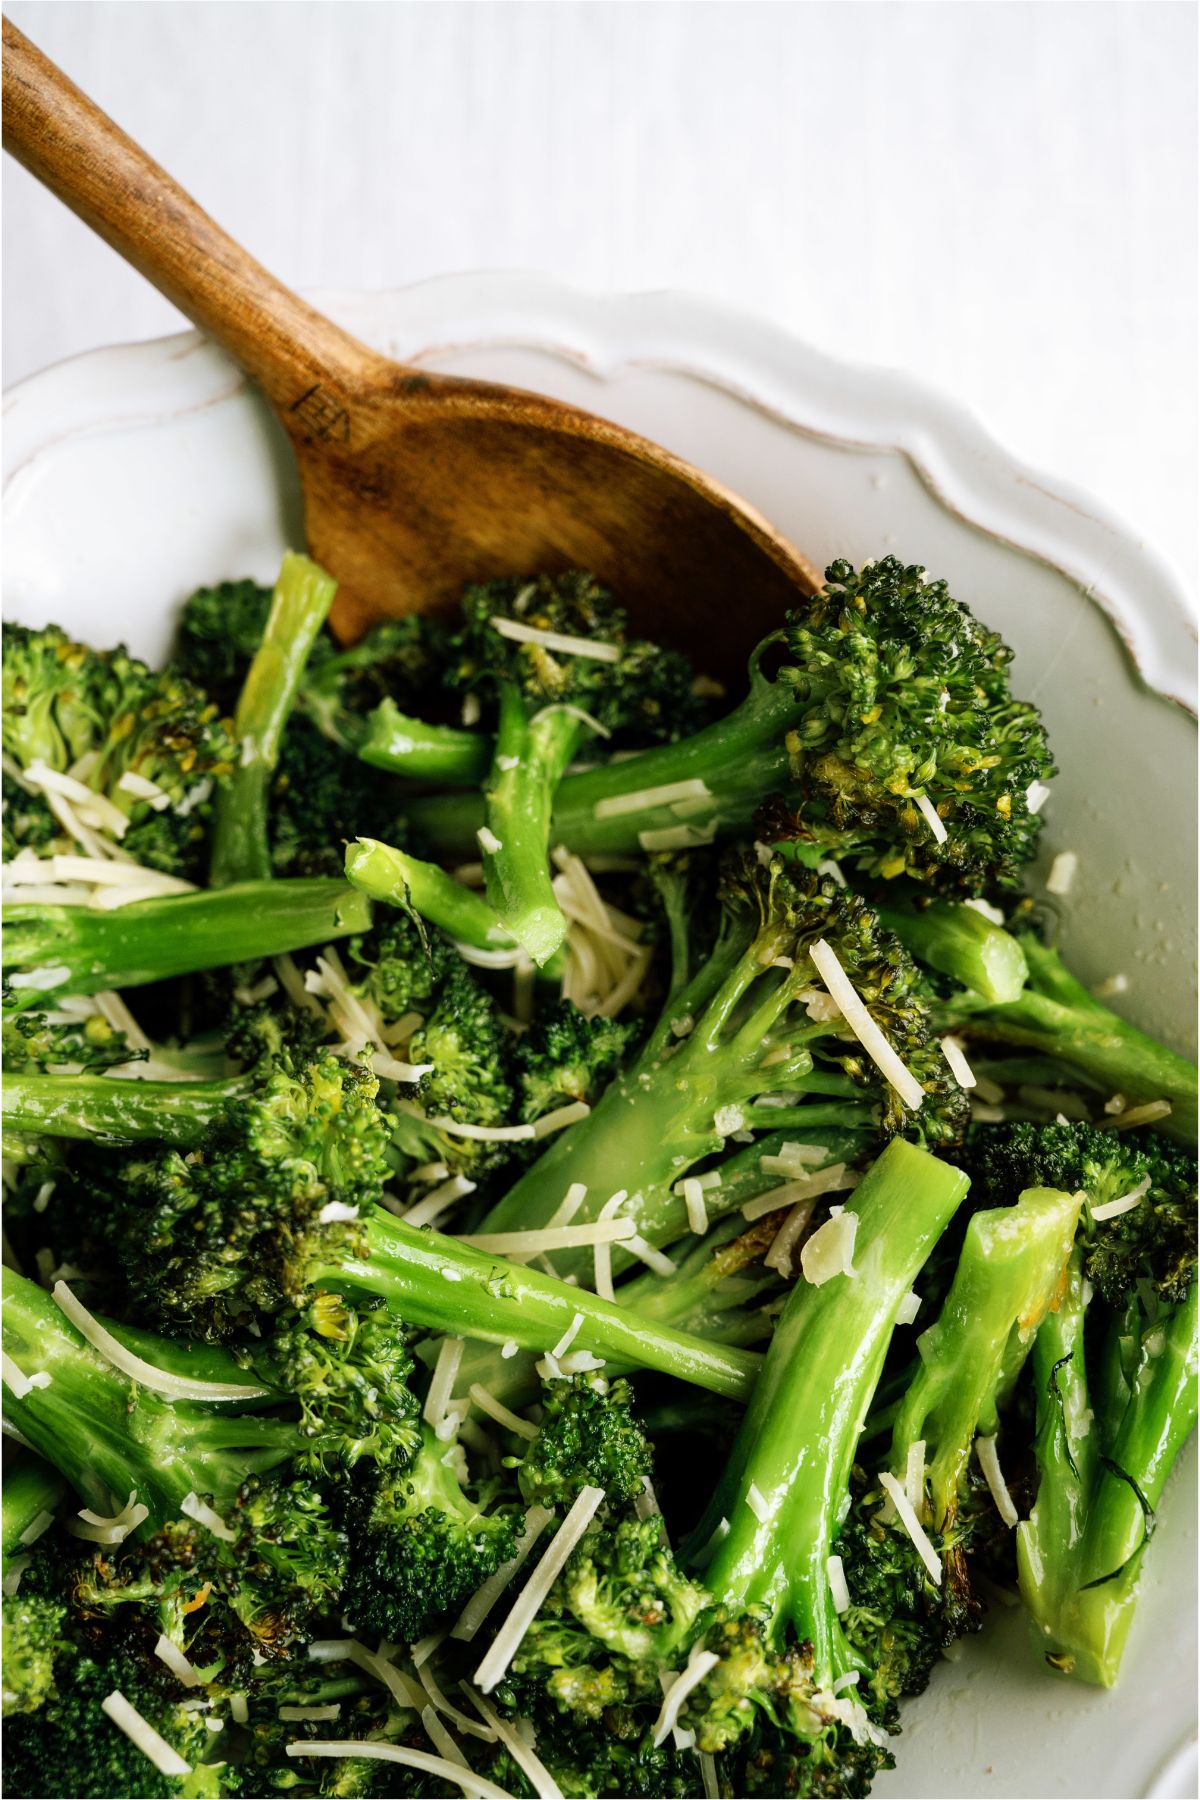 A bowl of Oven Roasted Parmesan Broccoli with a wooden spoon